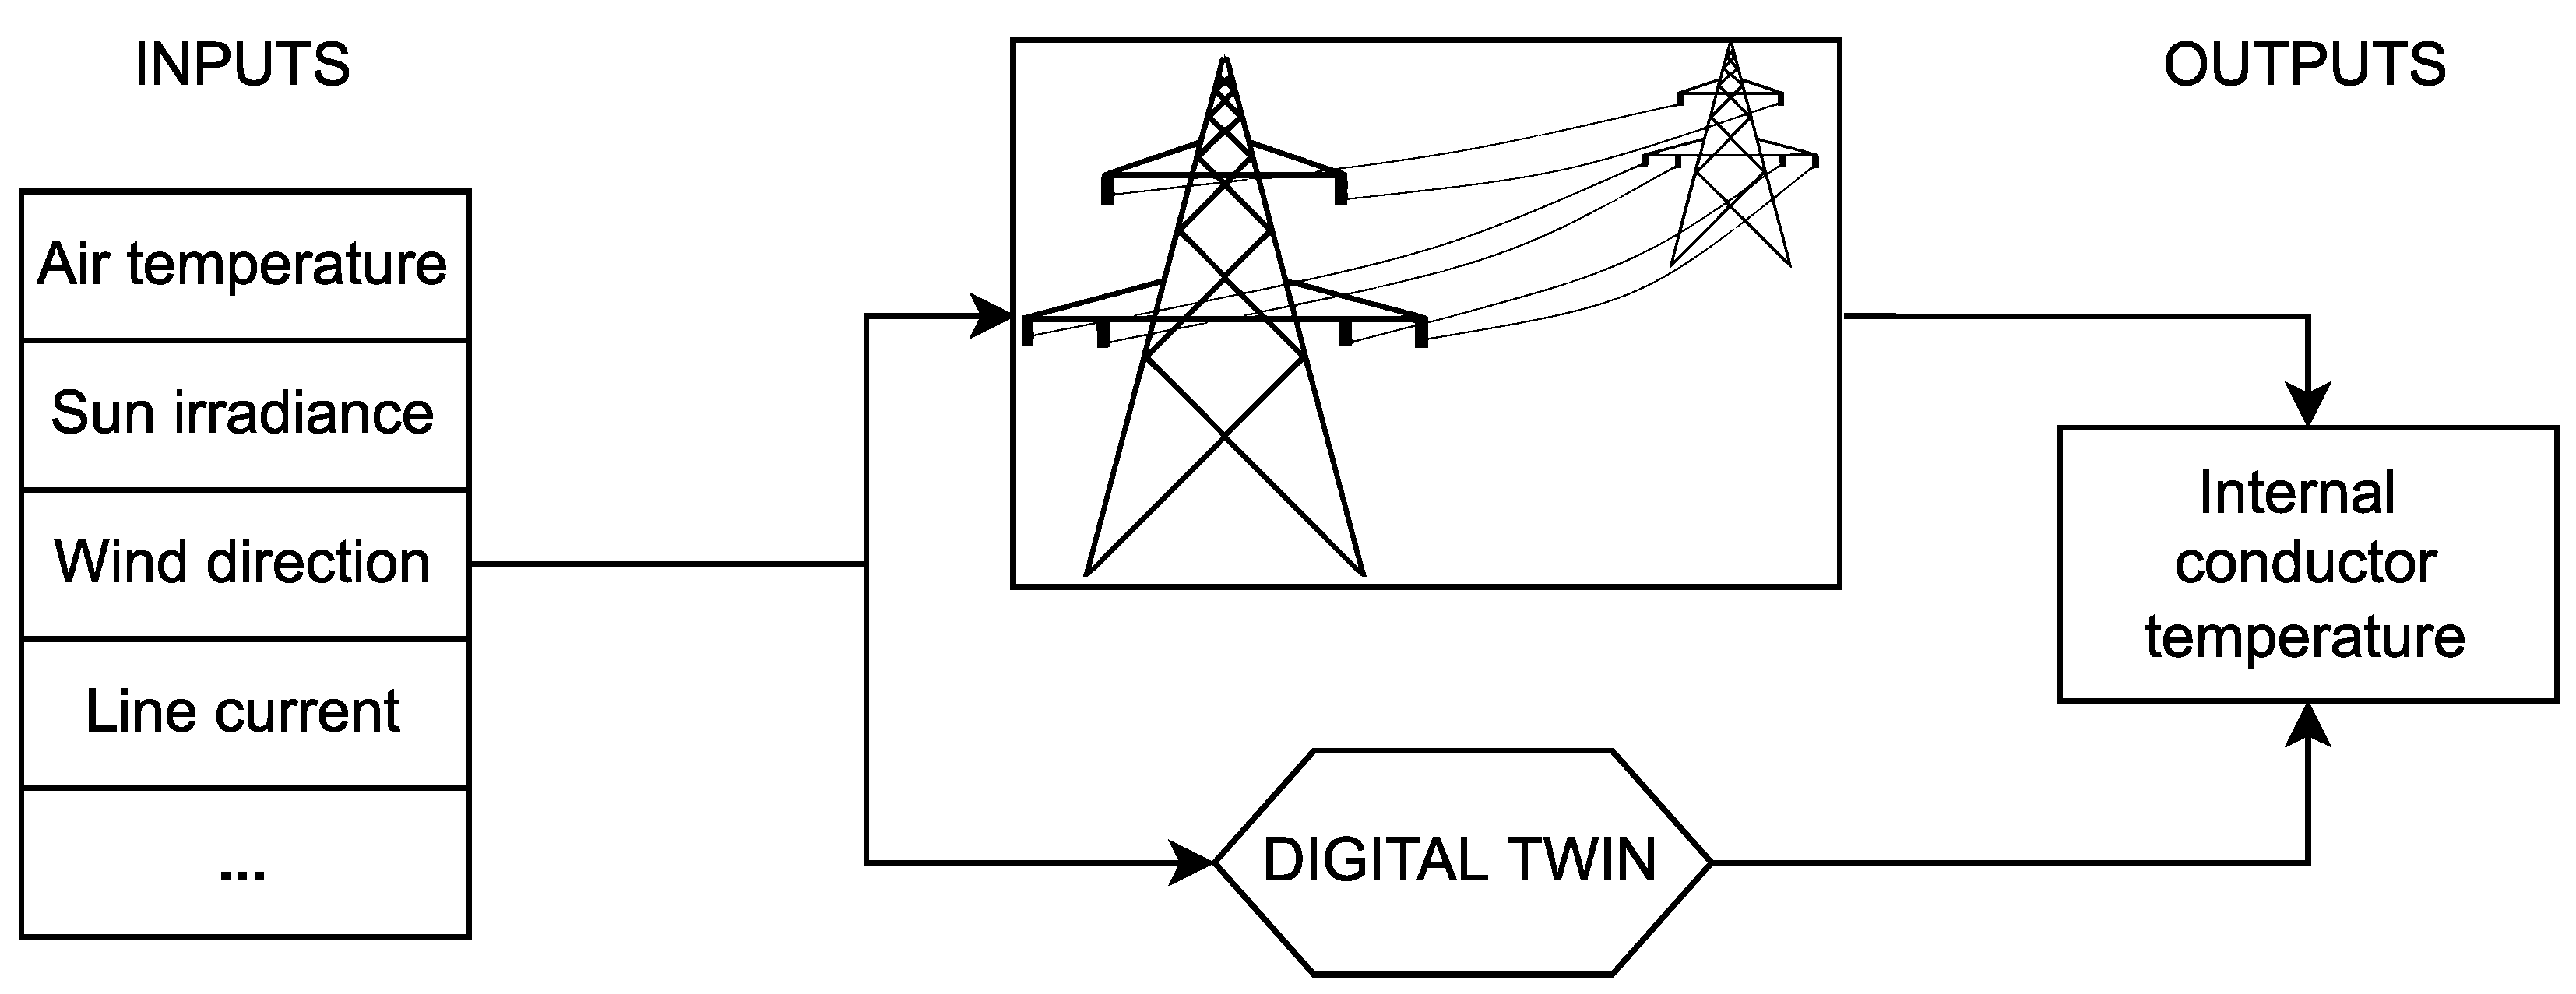 Energies | Free Full-Text | A Digital Twin Approach for Improving  Estimation Accuracy in Dynamic Thermal Rating of Transmission Lines